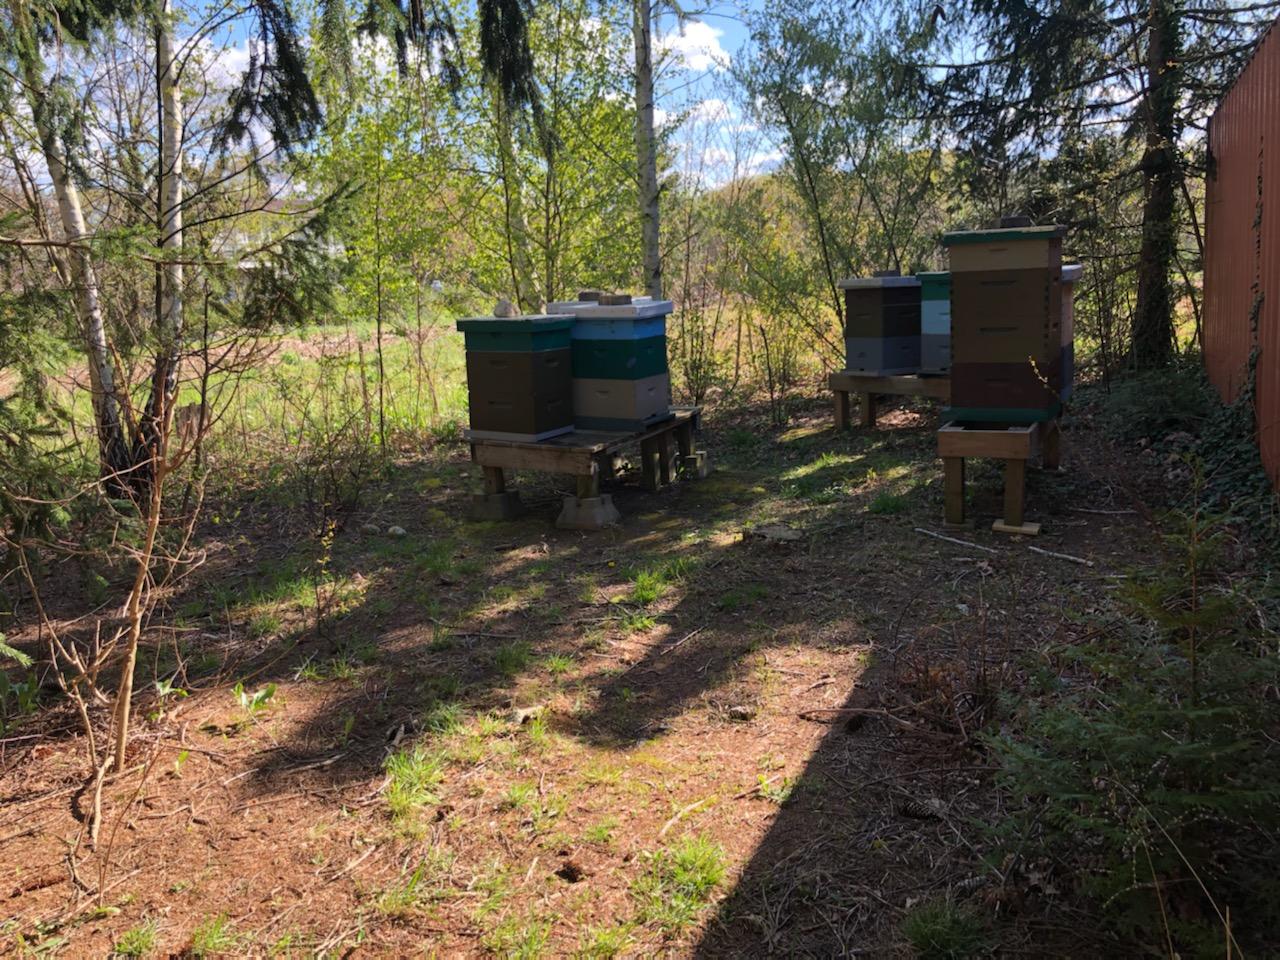 The beehives, shaded by trees in the afternoon sun.